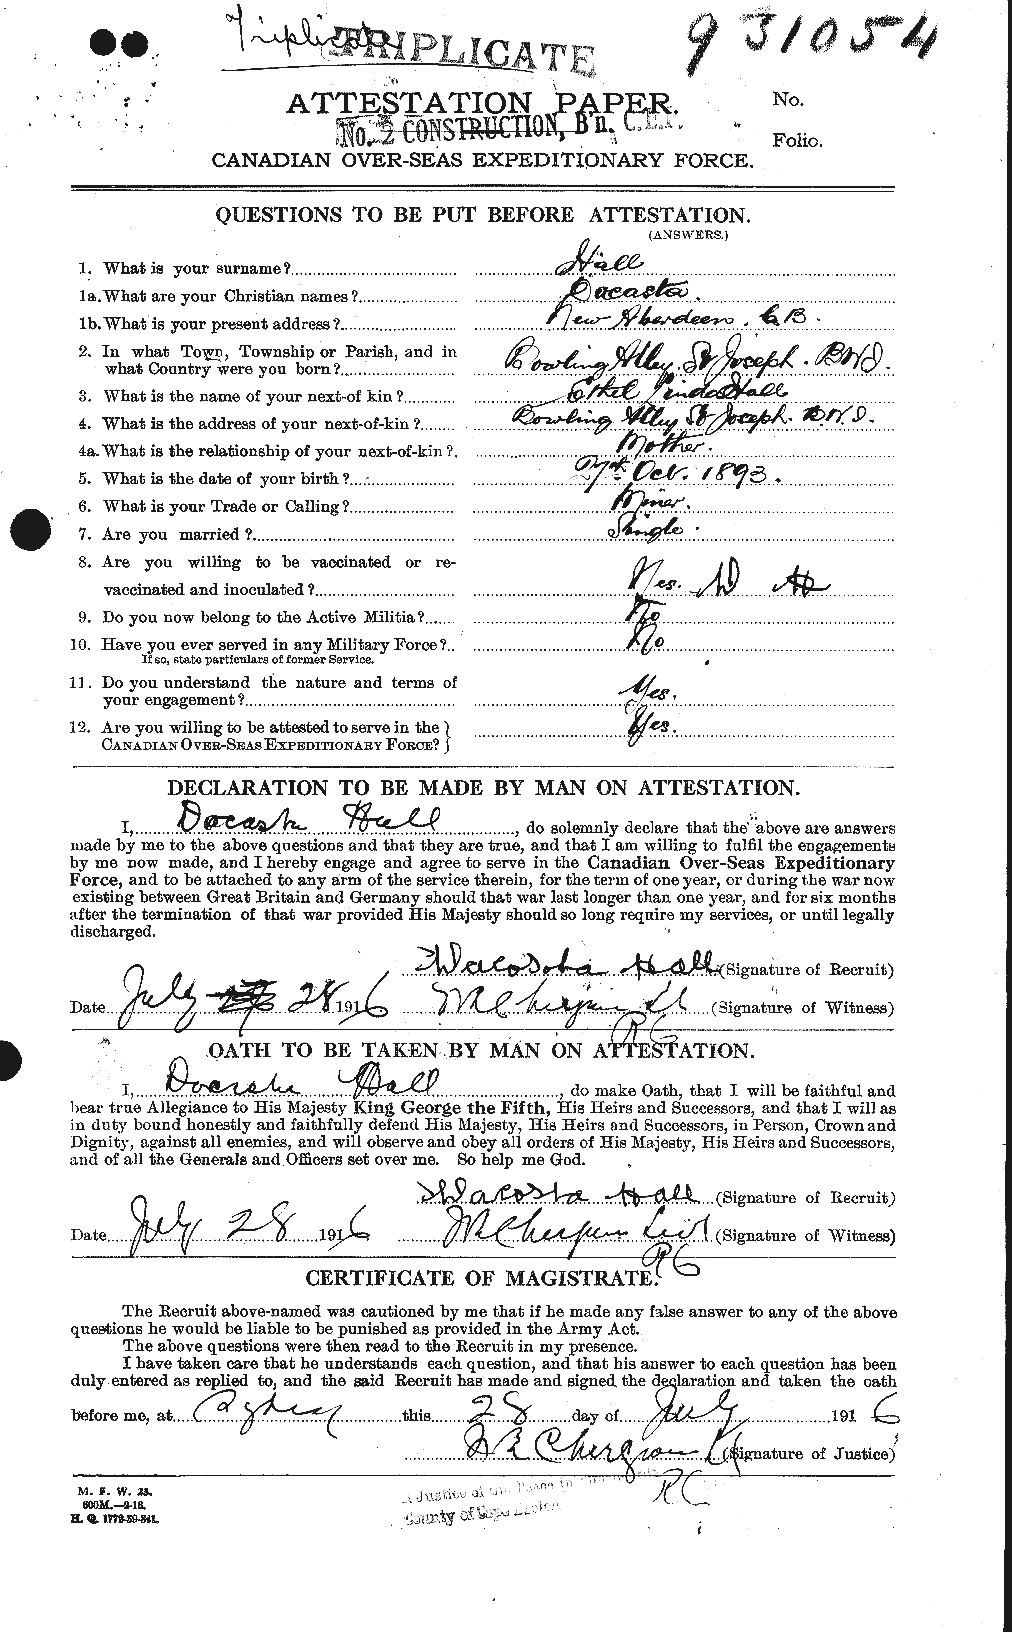 Personnel Records of the First World War - CEF 372681a